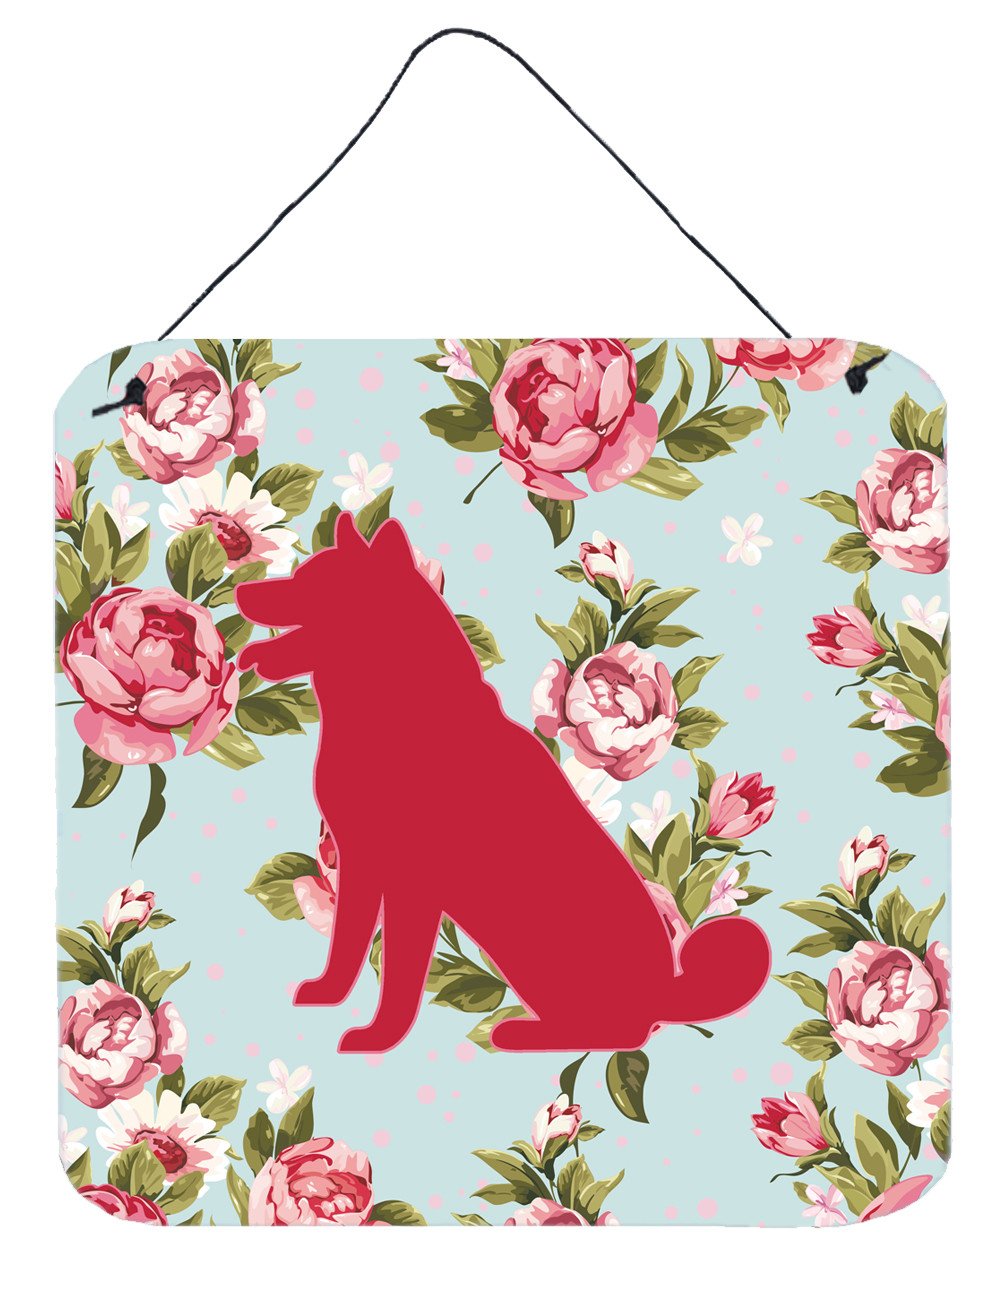 Shiba Inu Shabby Chic Blue Roses Wall or Door Hanging Prints BB1113 by Caroline's Treasures